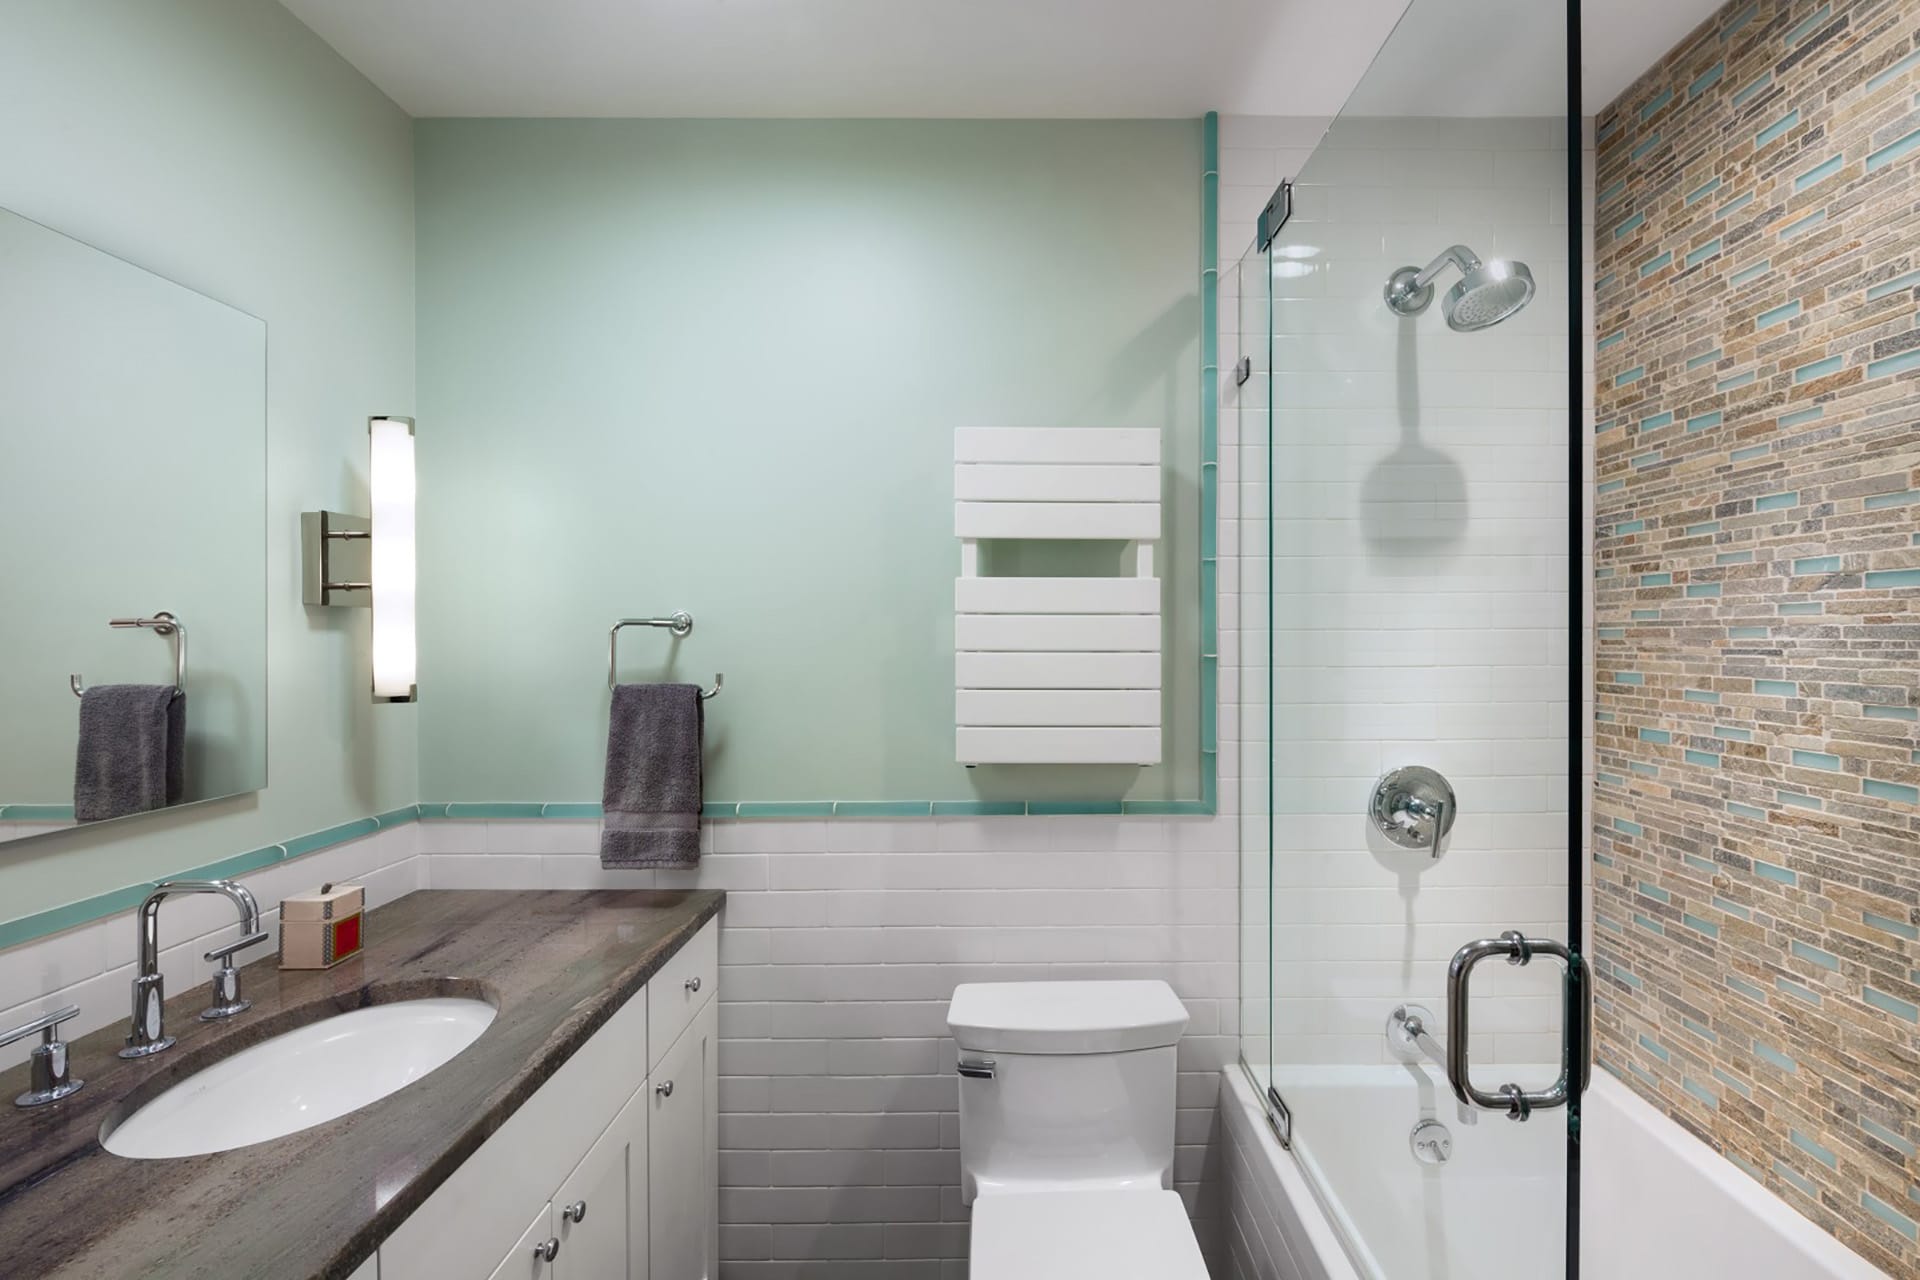 Primary bathroom with light teal walls, glass tiles in the shower, and natural stone countertops